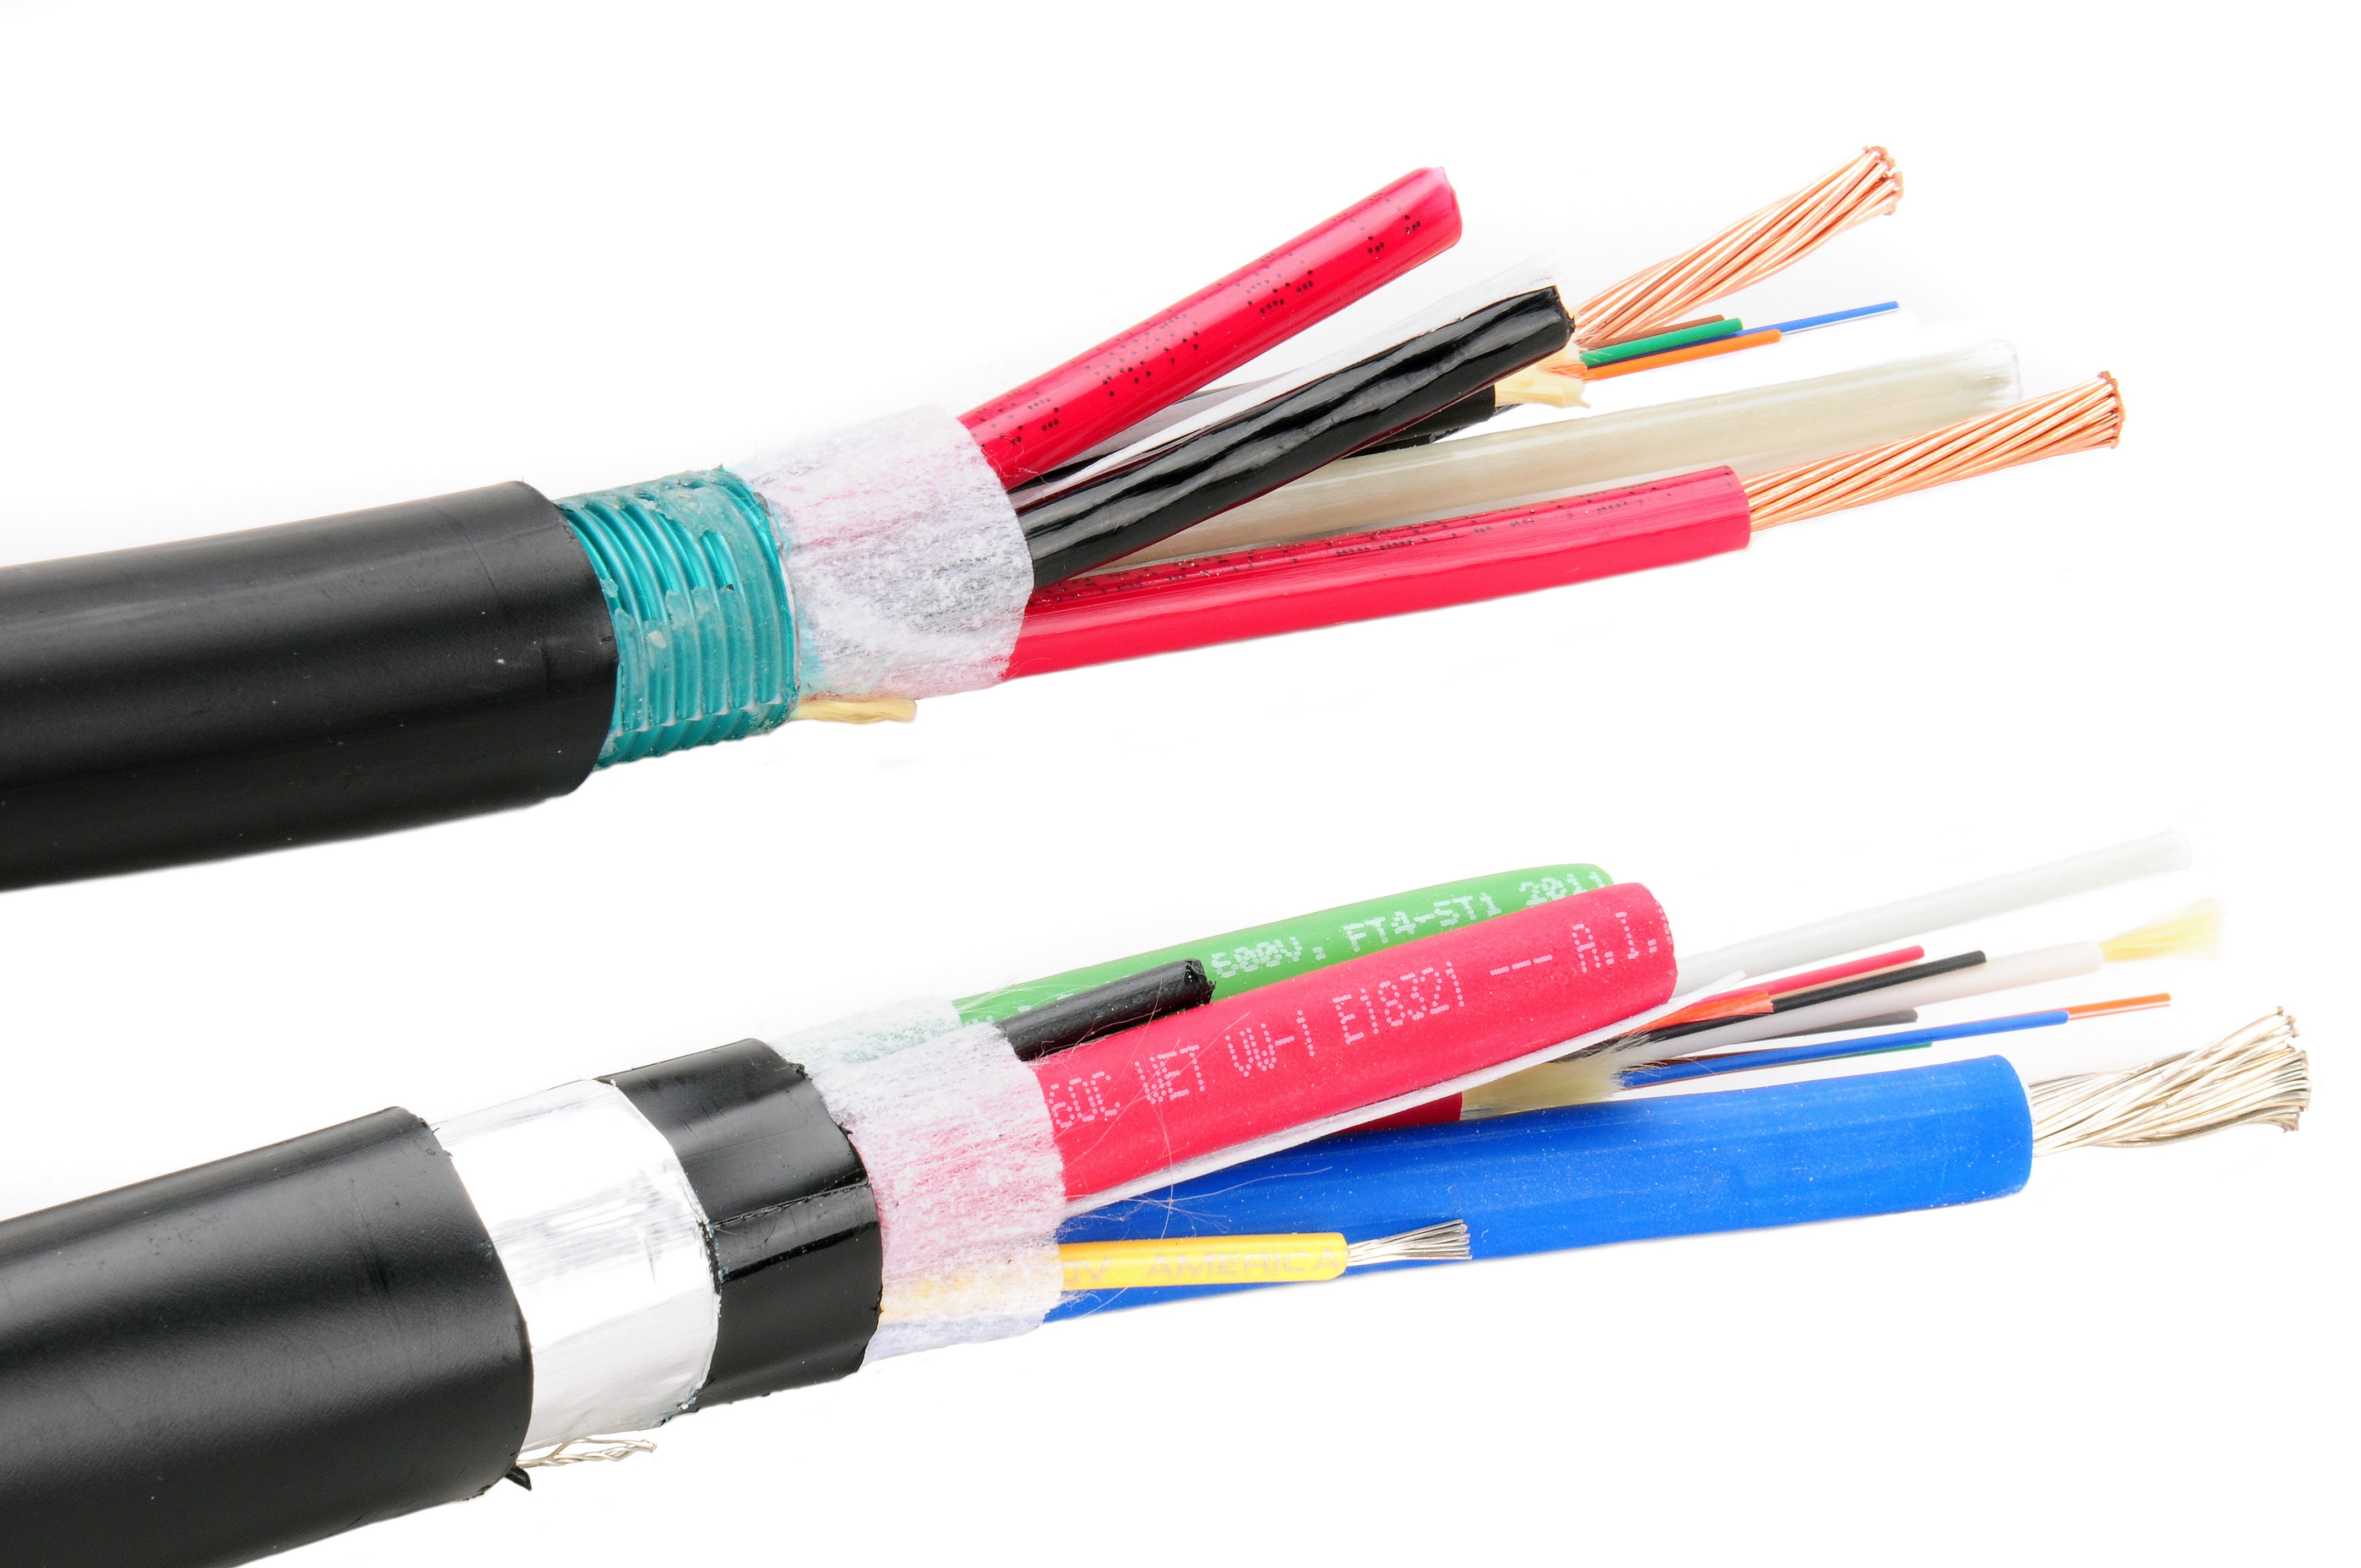 Cable, LM-RDT Cat 6A UTP Cable